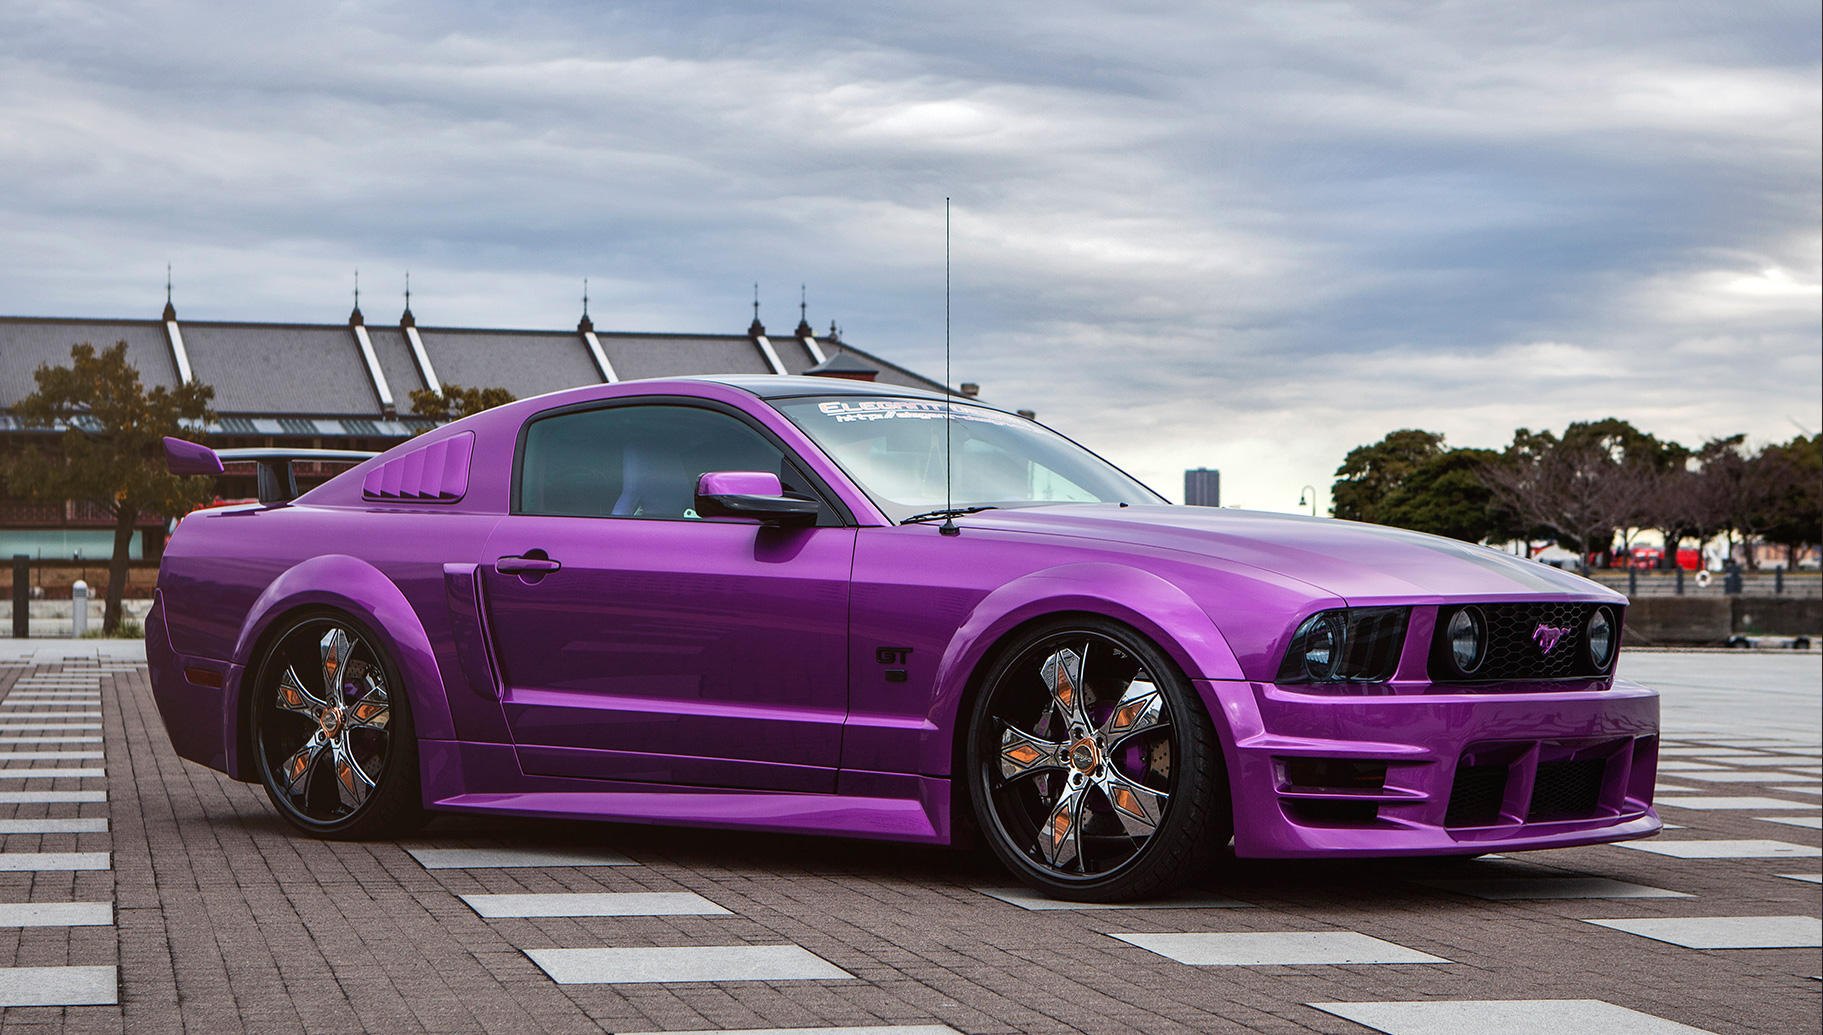 Full Body Kit on Ford Mustang - Photo by Lexani